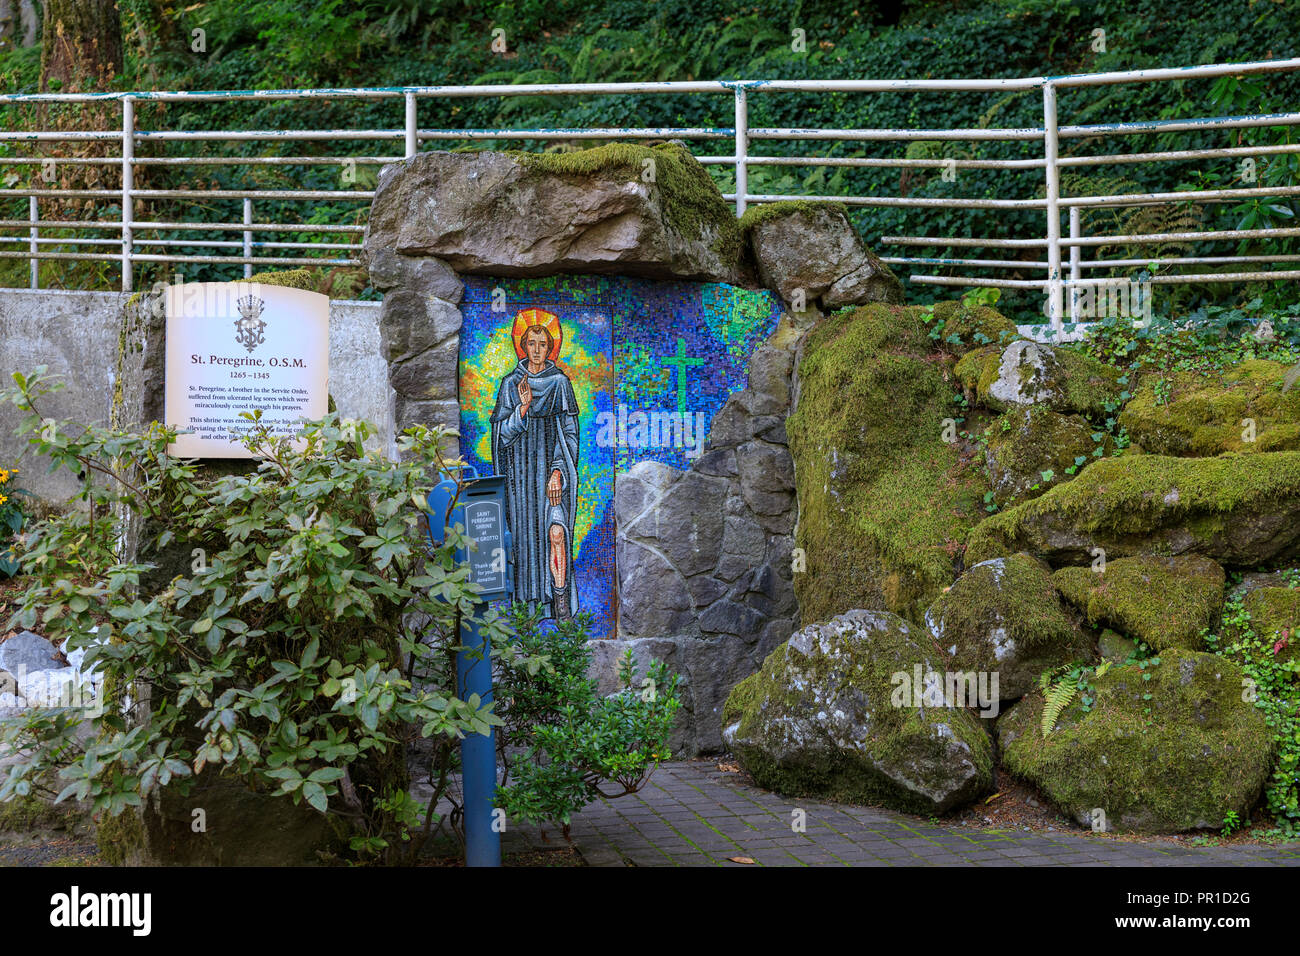 Portland, Oregon - Sep 24, 2018 : Mosaic Image of St. Peregrine at The Grotto. St. Peregrine (1265-1345) is known as the Cancer Saint Stock Photo